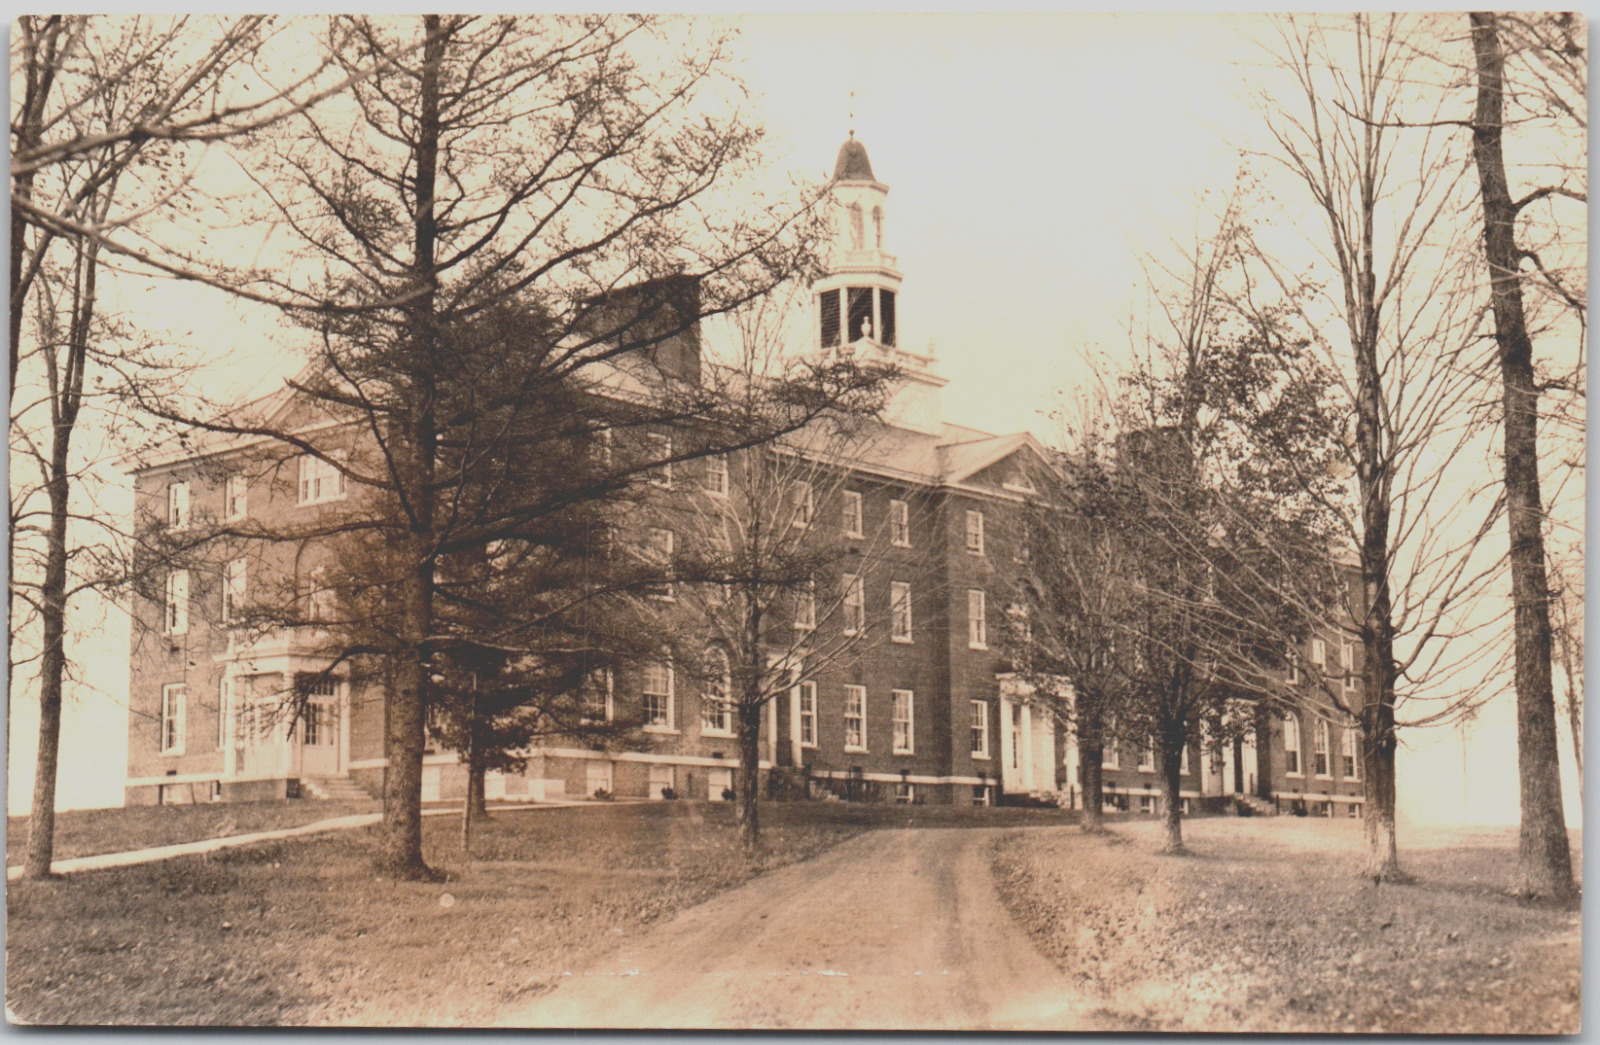 Colby Sawyer College Waterville Maine 1923 School Building RPPC Vintage Postcard